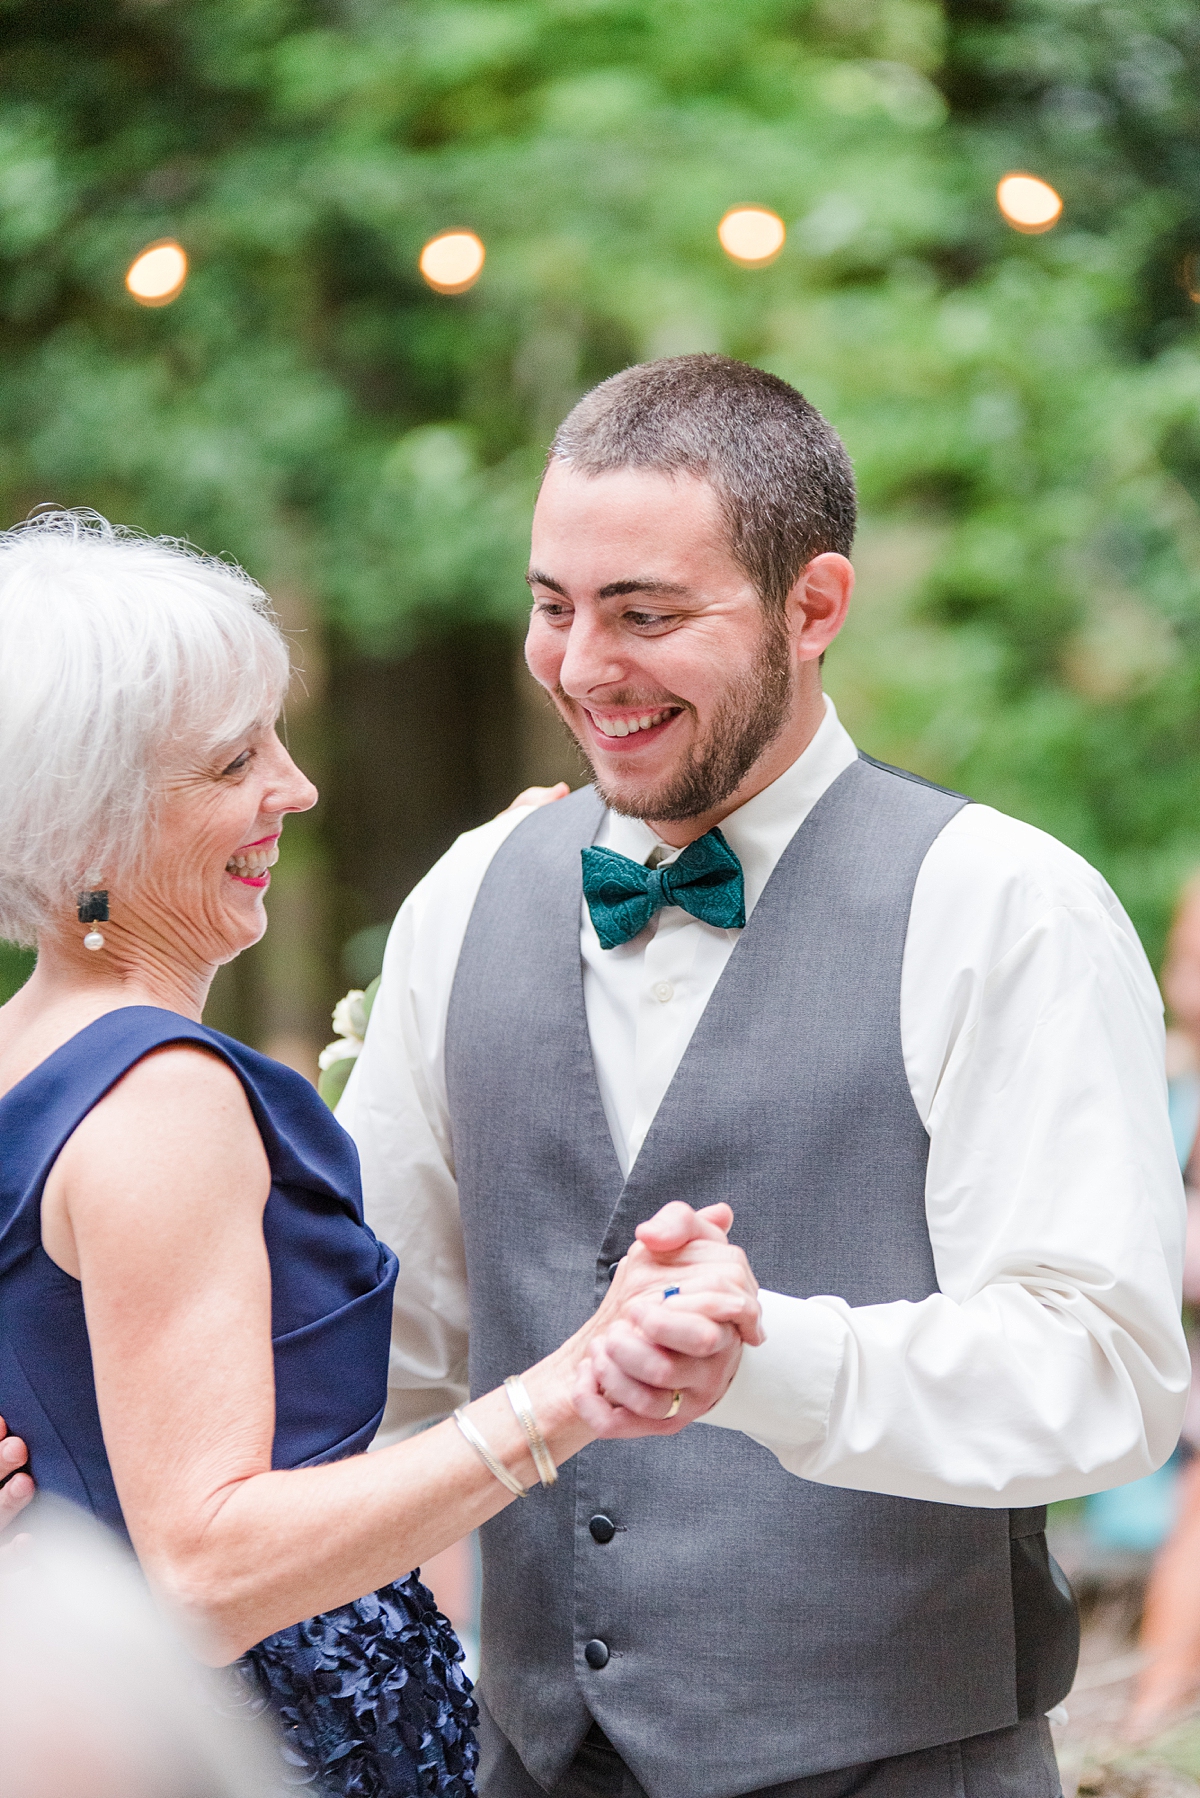 Mother Son Dance at Yorktown Backyard Intimate Wedding Reception. Wedding Photography by Richmond Wedding Photographer Kailey Brianne Photography. 